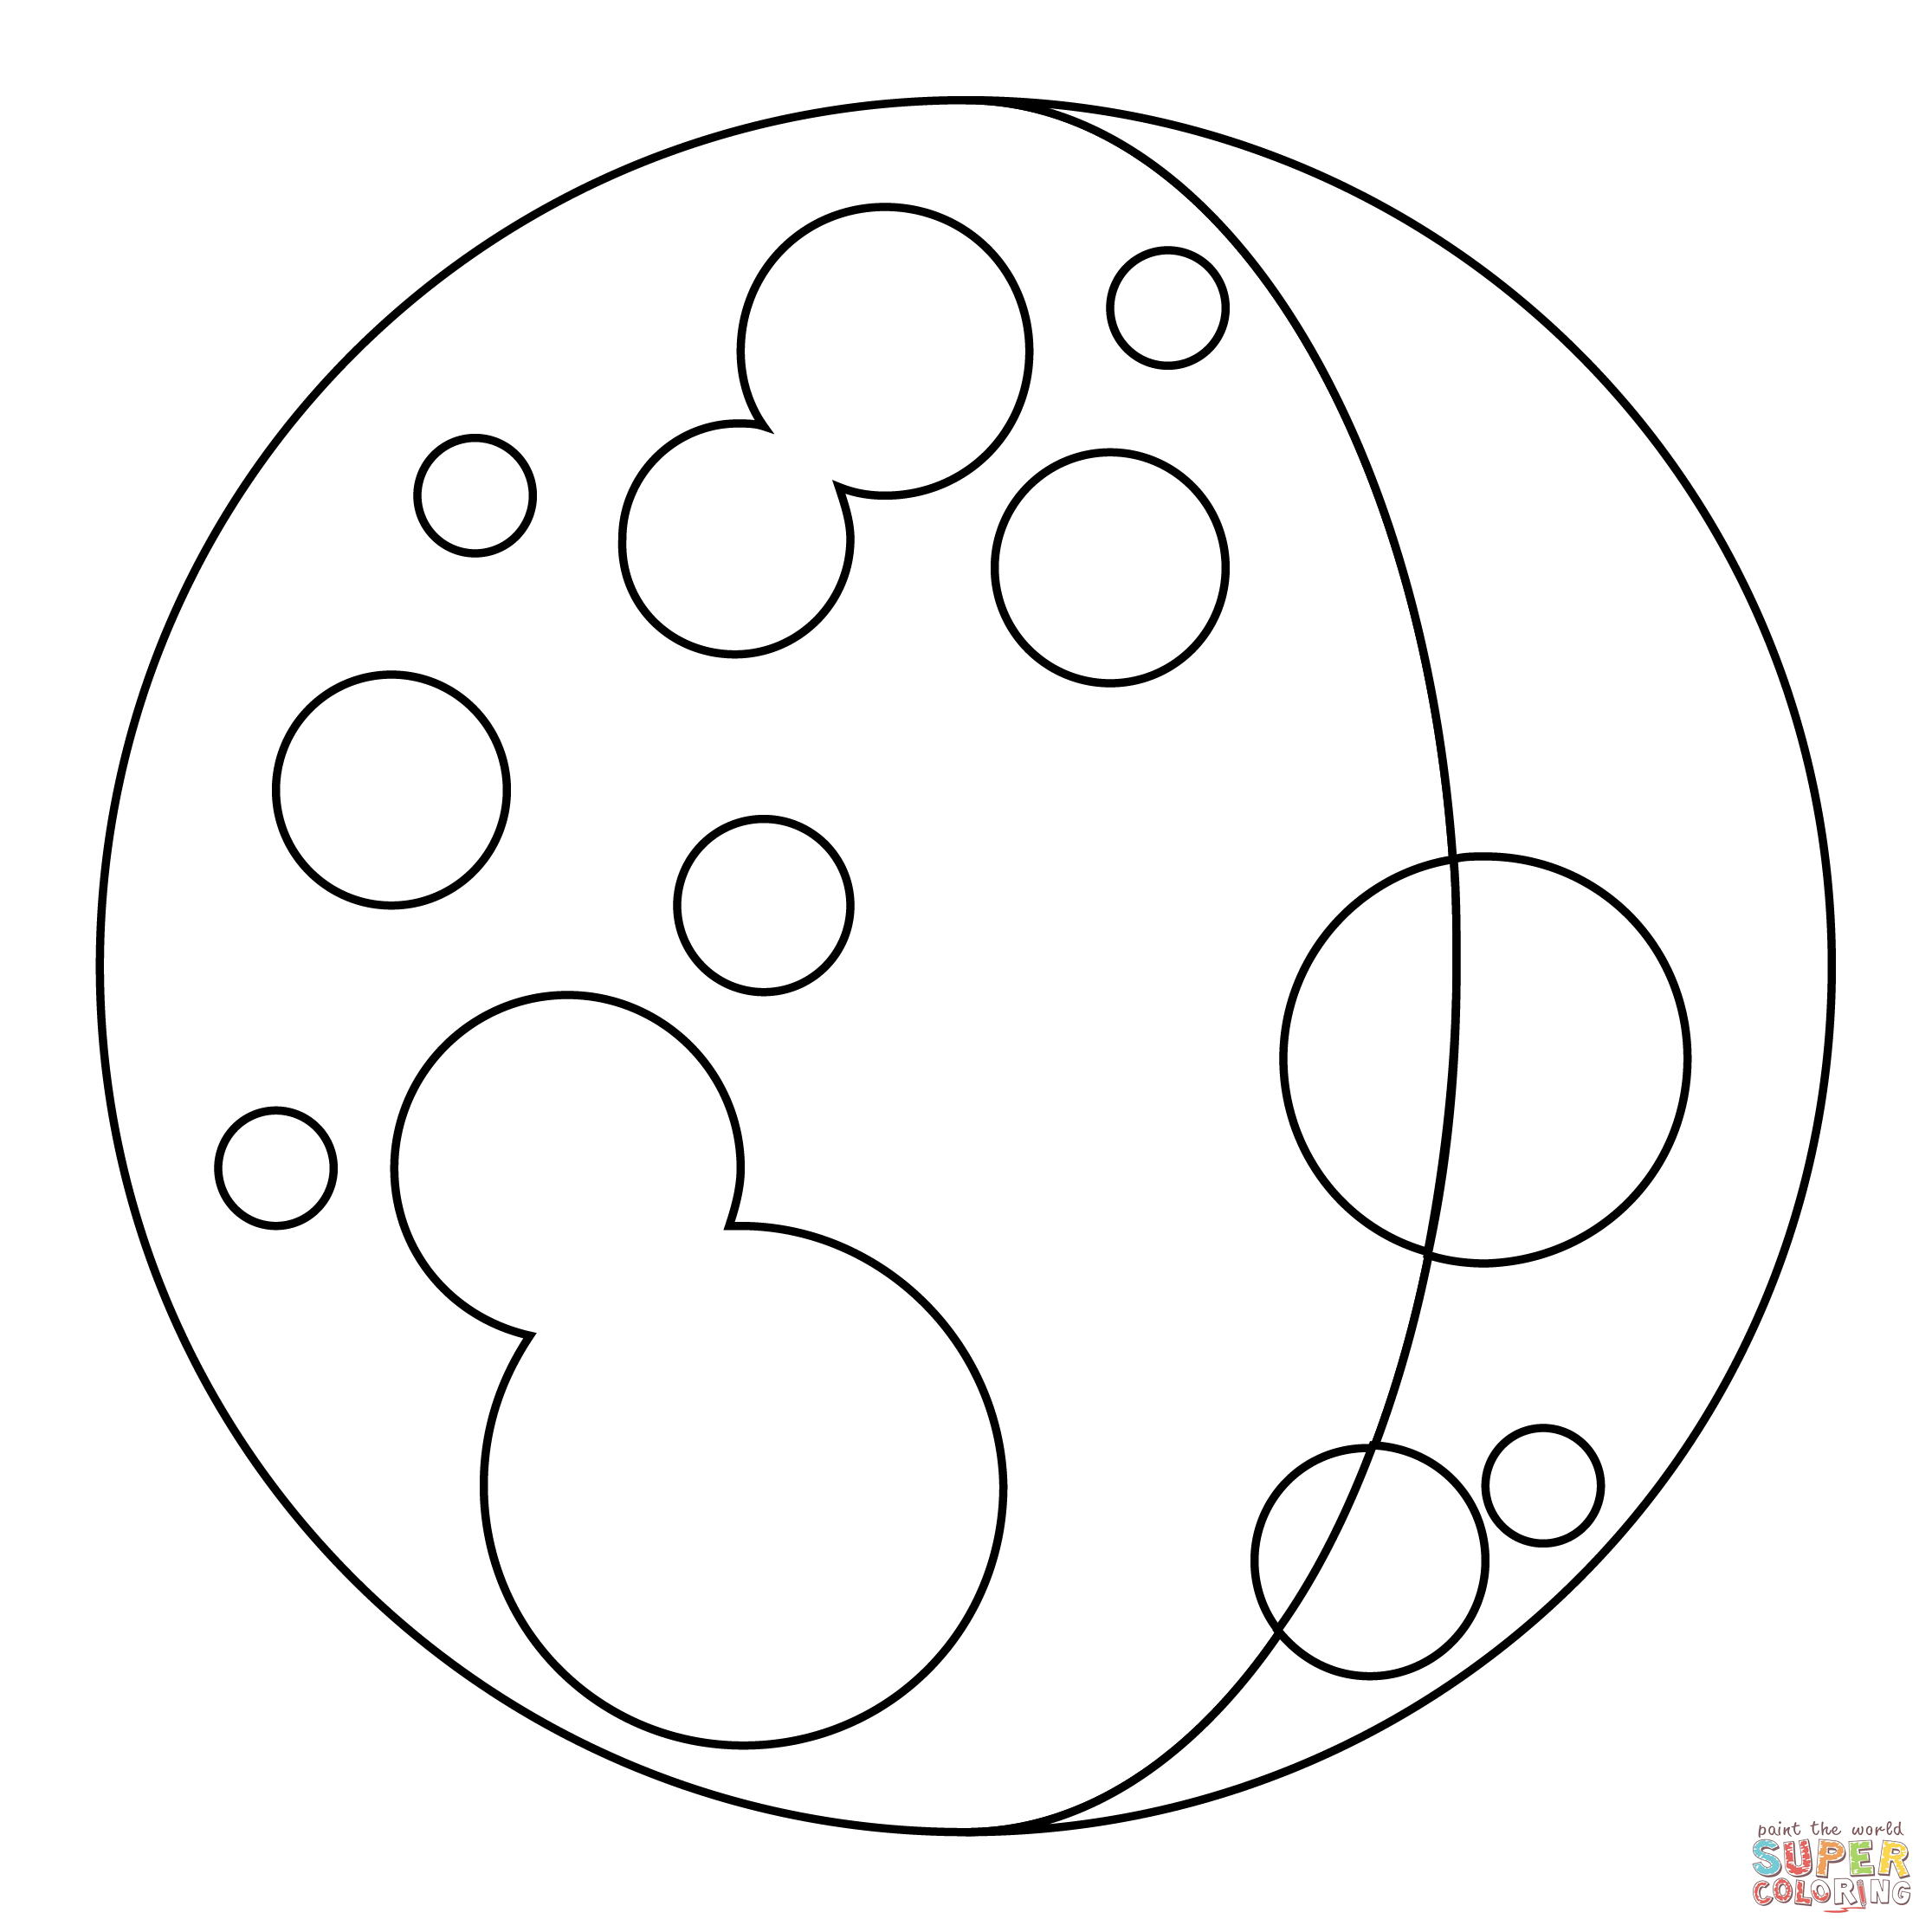 Waxing crescent moon coloring page free printable coloring pages